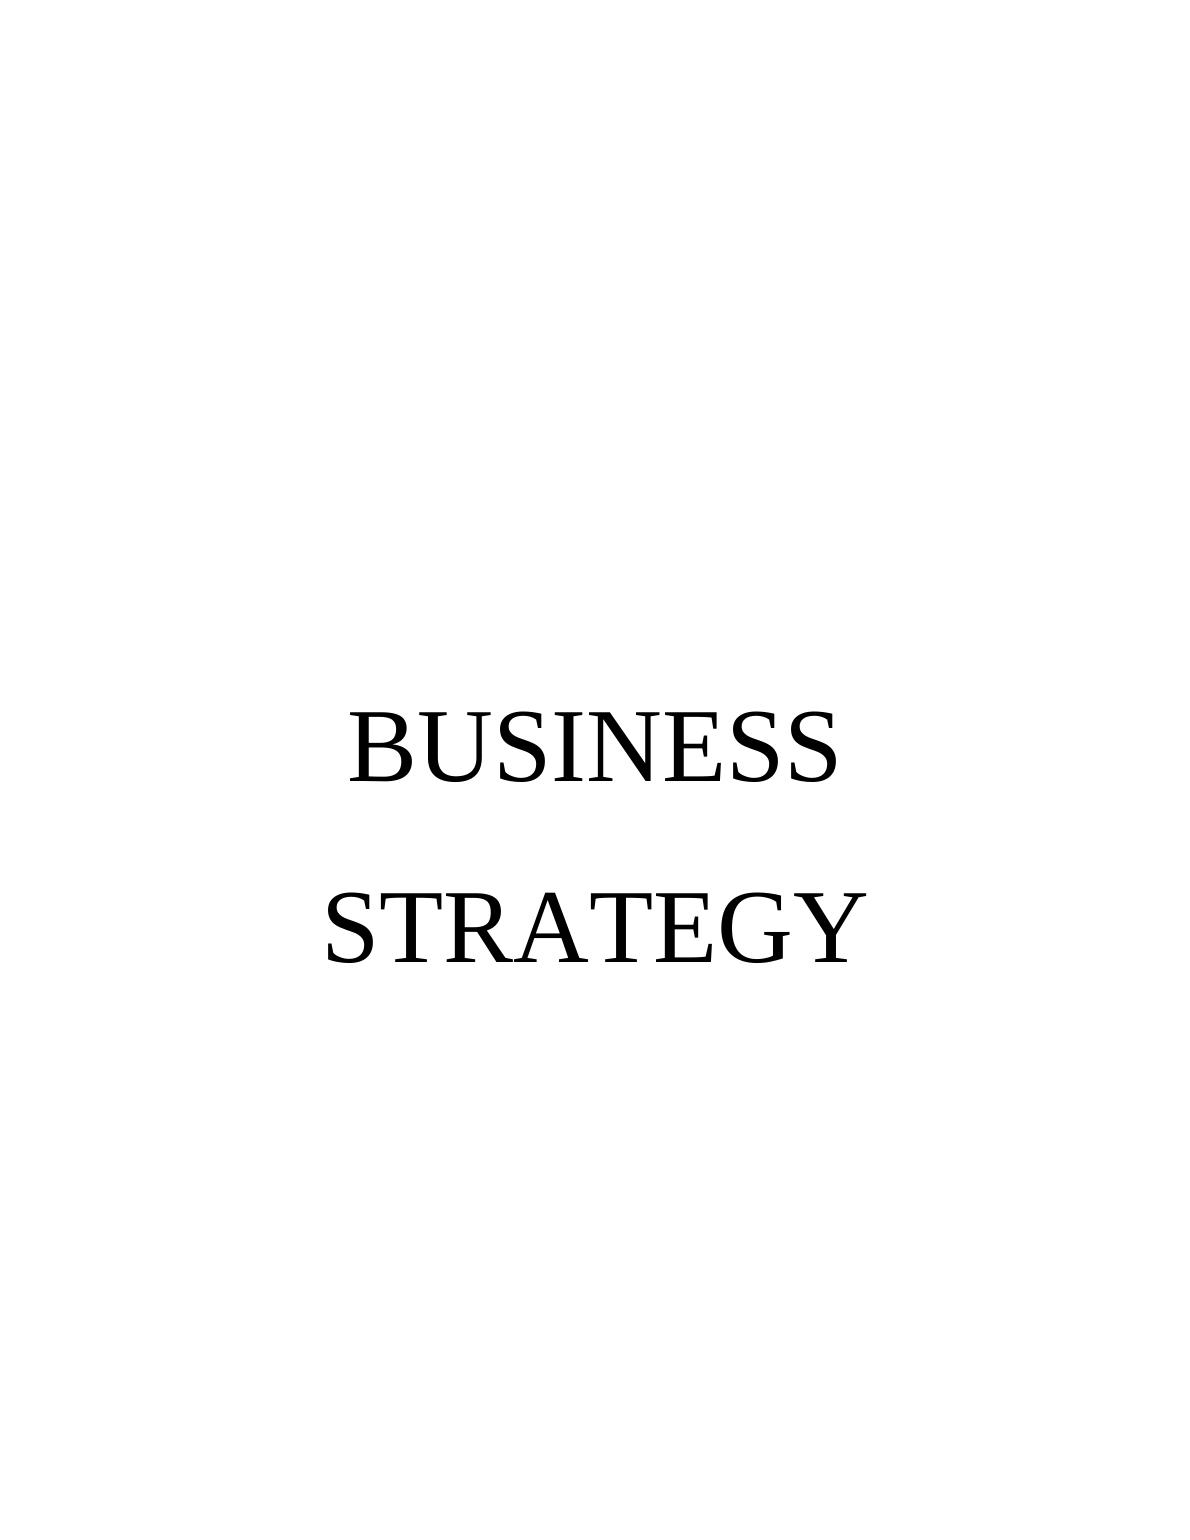 Report on Application of Business Strategy : VW AG company_1